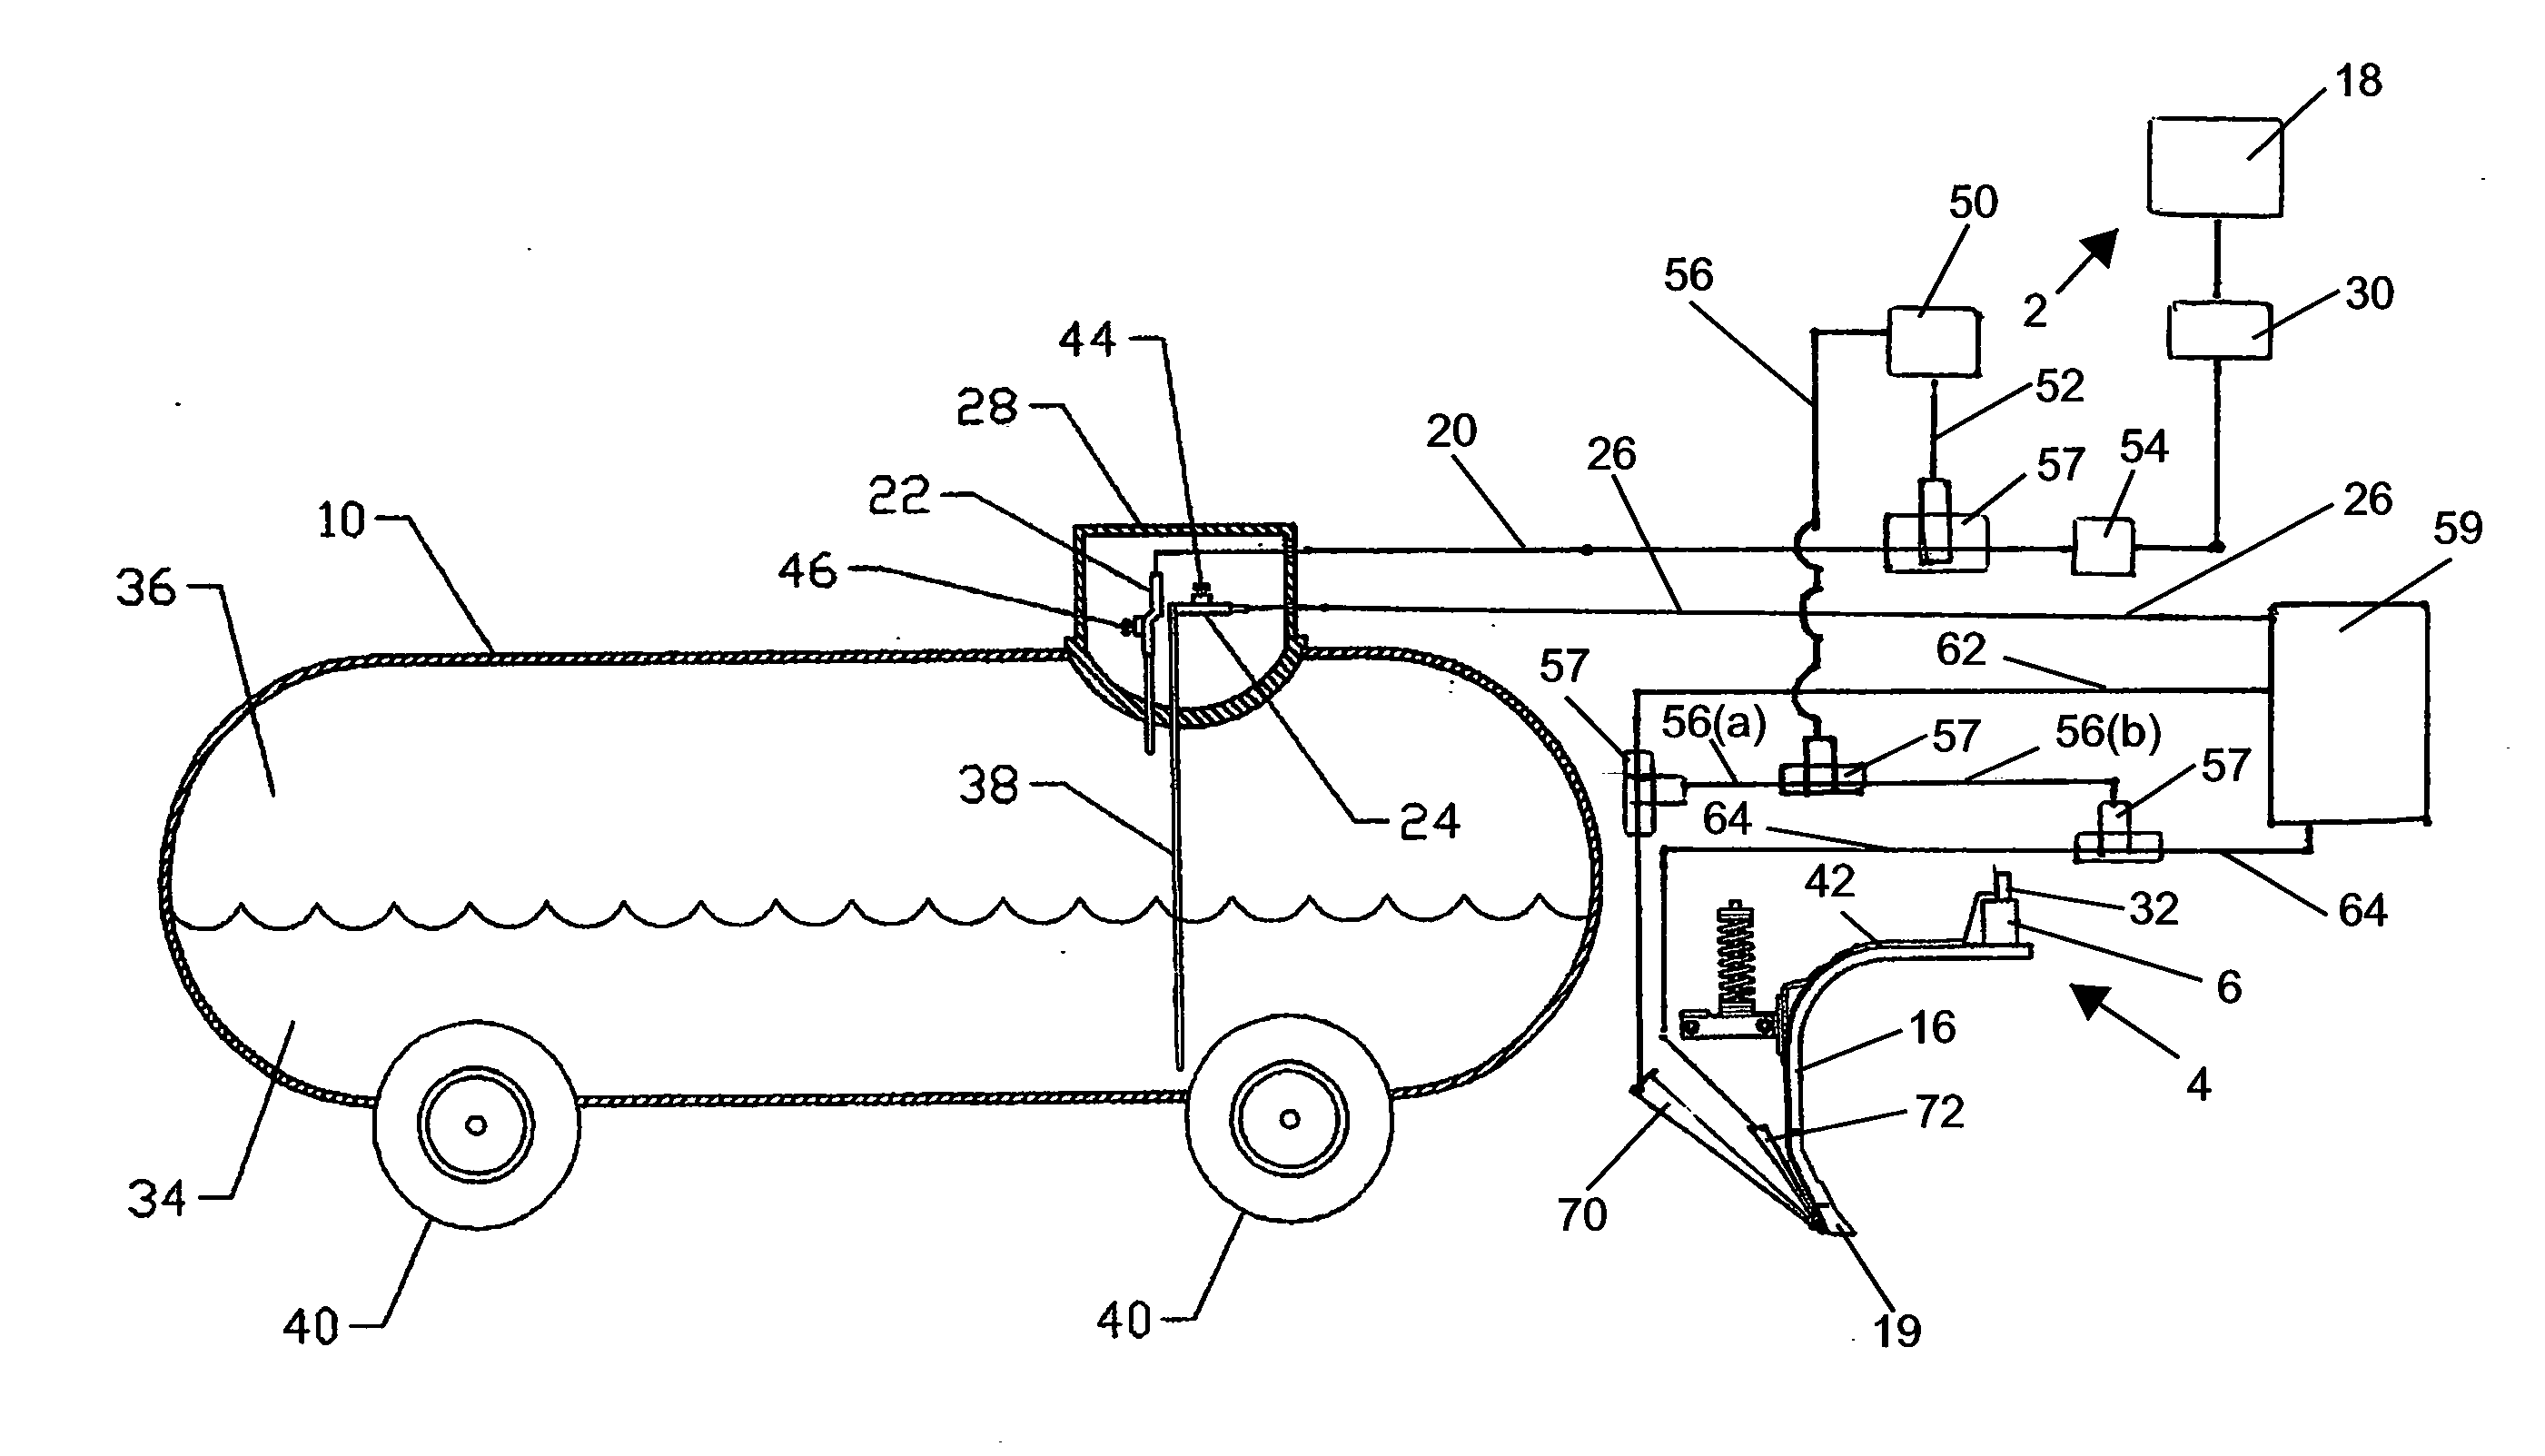 Apparatus to improve field application of anhydrous ammonia in cold temperatures